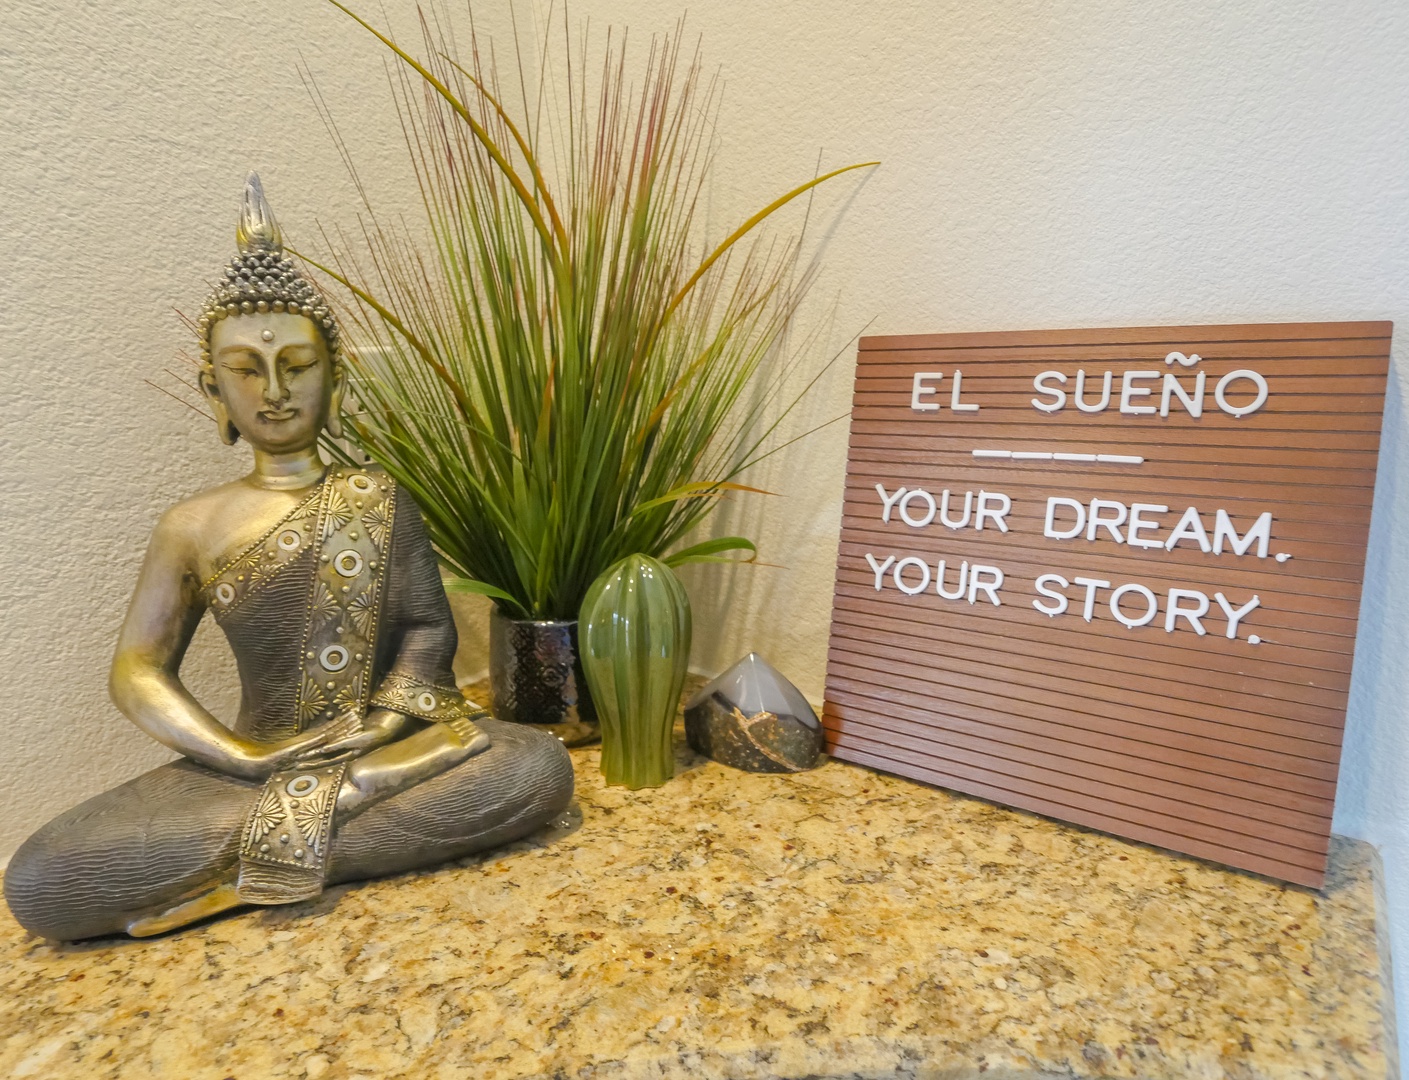 Live your dreams at the stunning El Sueno Scottsdale